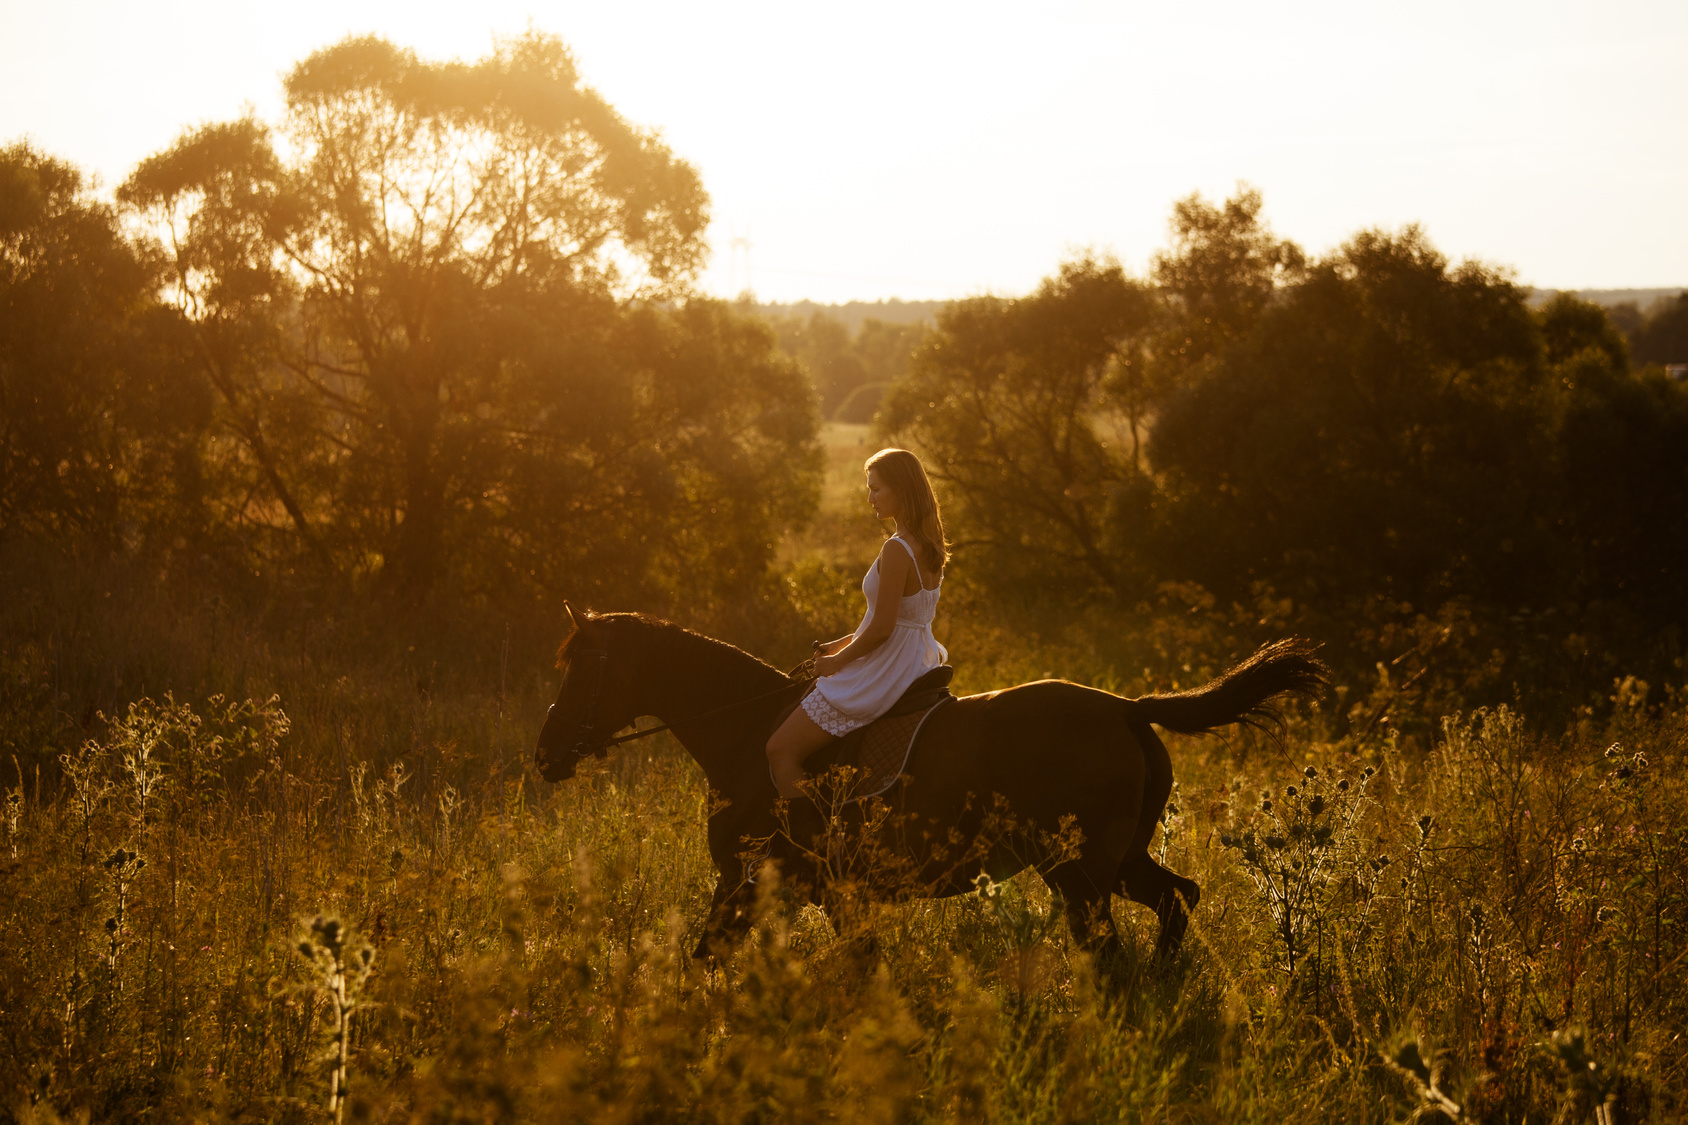 Girl in white dress on a horse